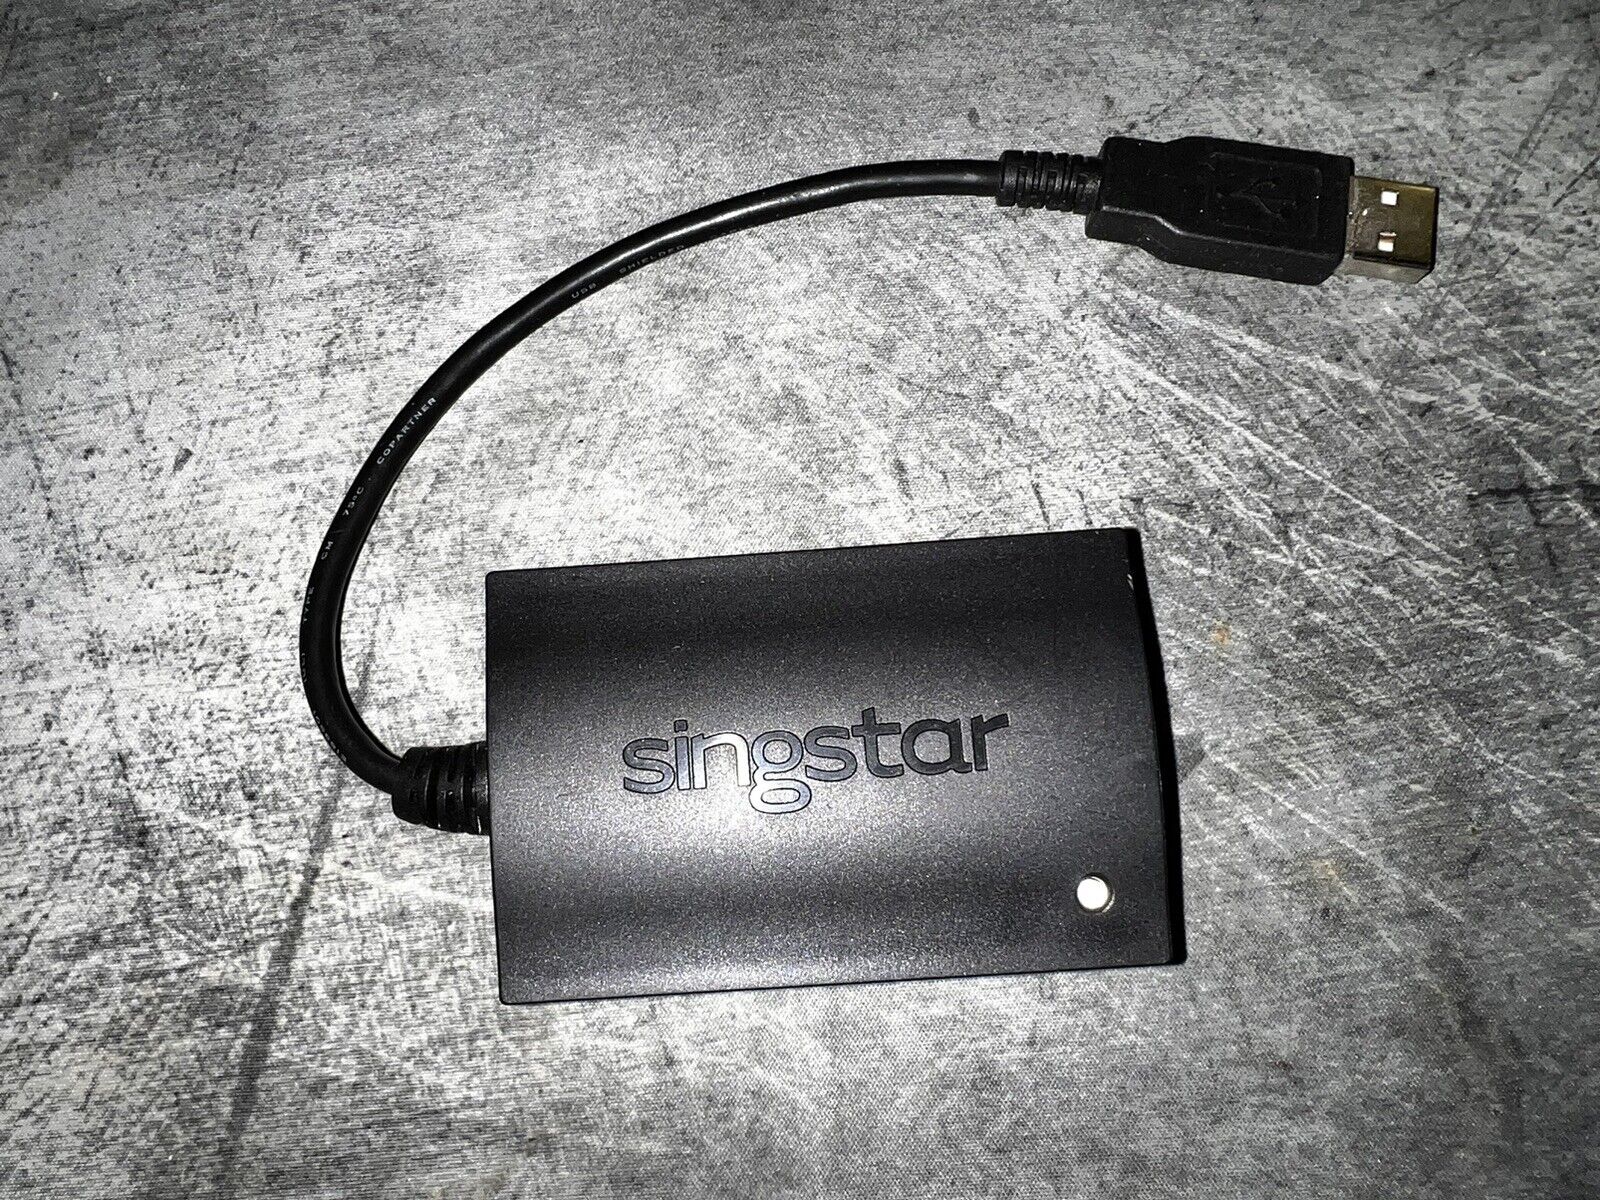 Synlig Kilauea Mountain syre Playstation PS2 PS3 PS4 PS5 Singstar USB Converter Dongle for Wired  Microphones | Being Patient